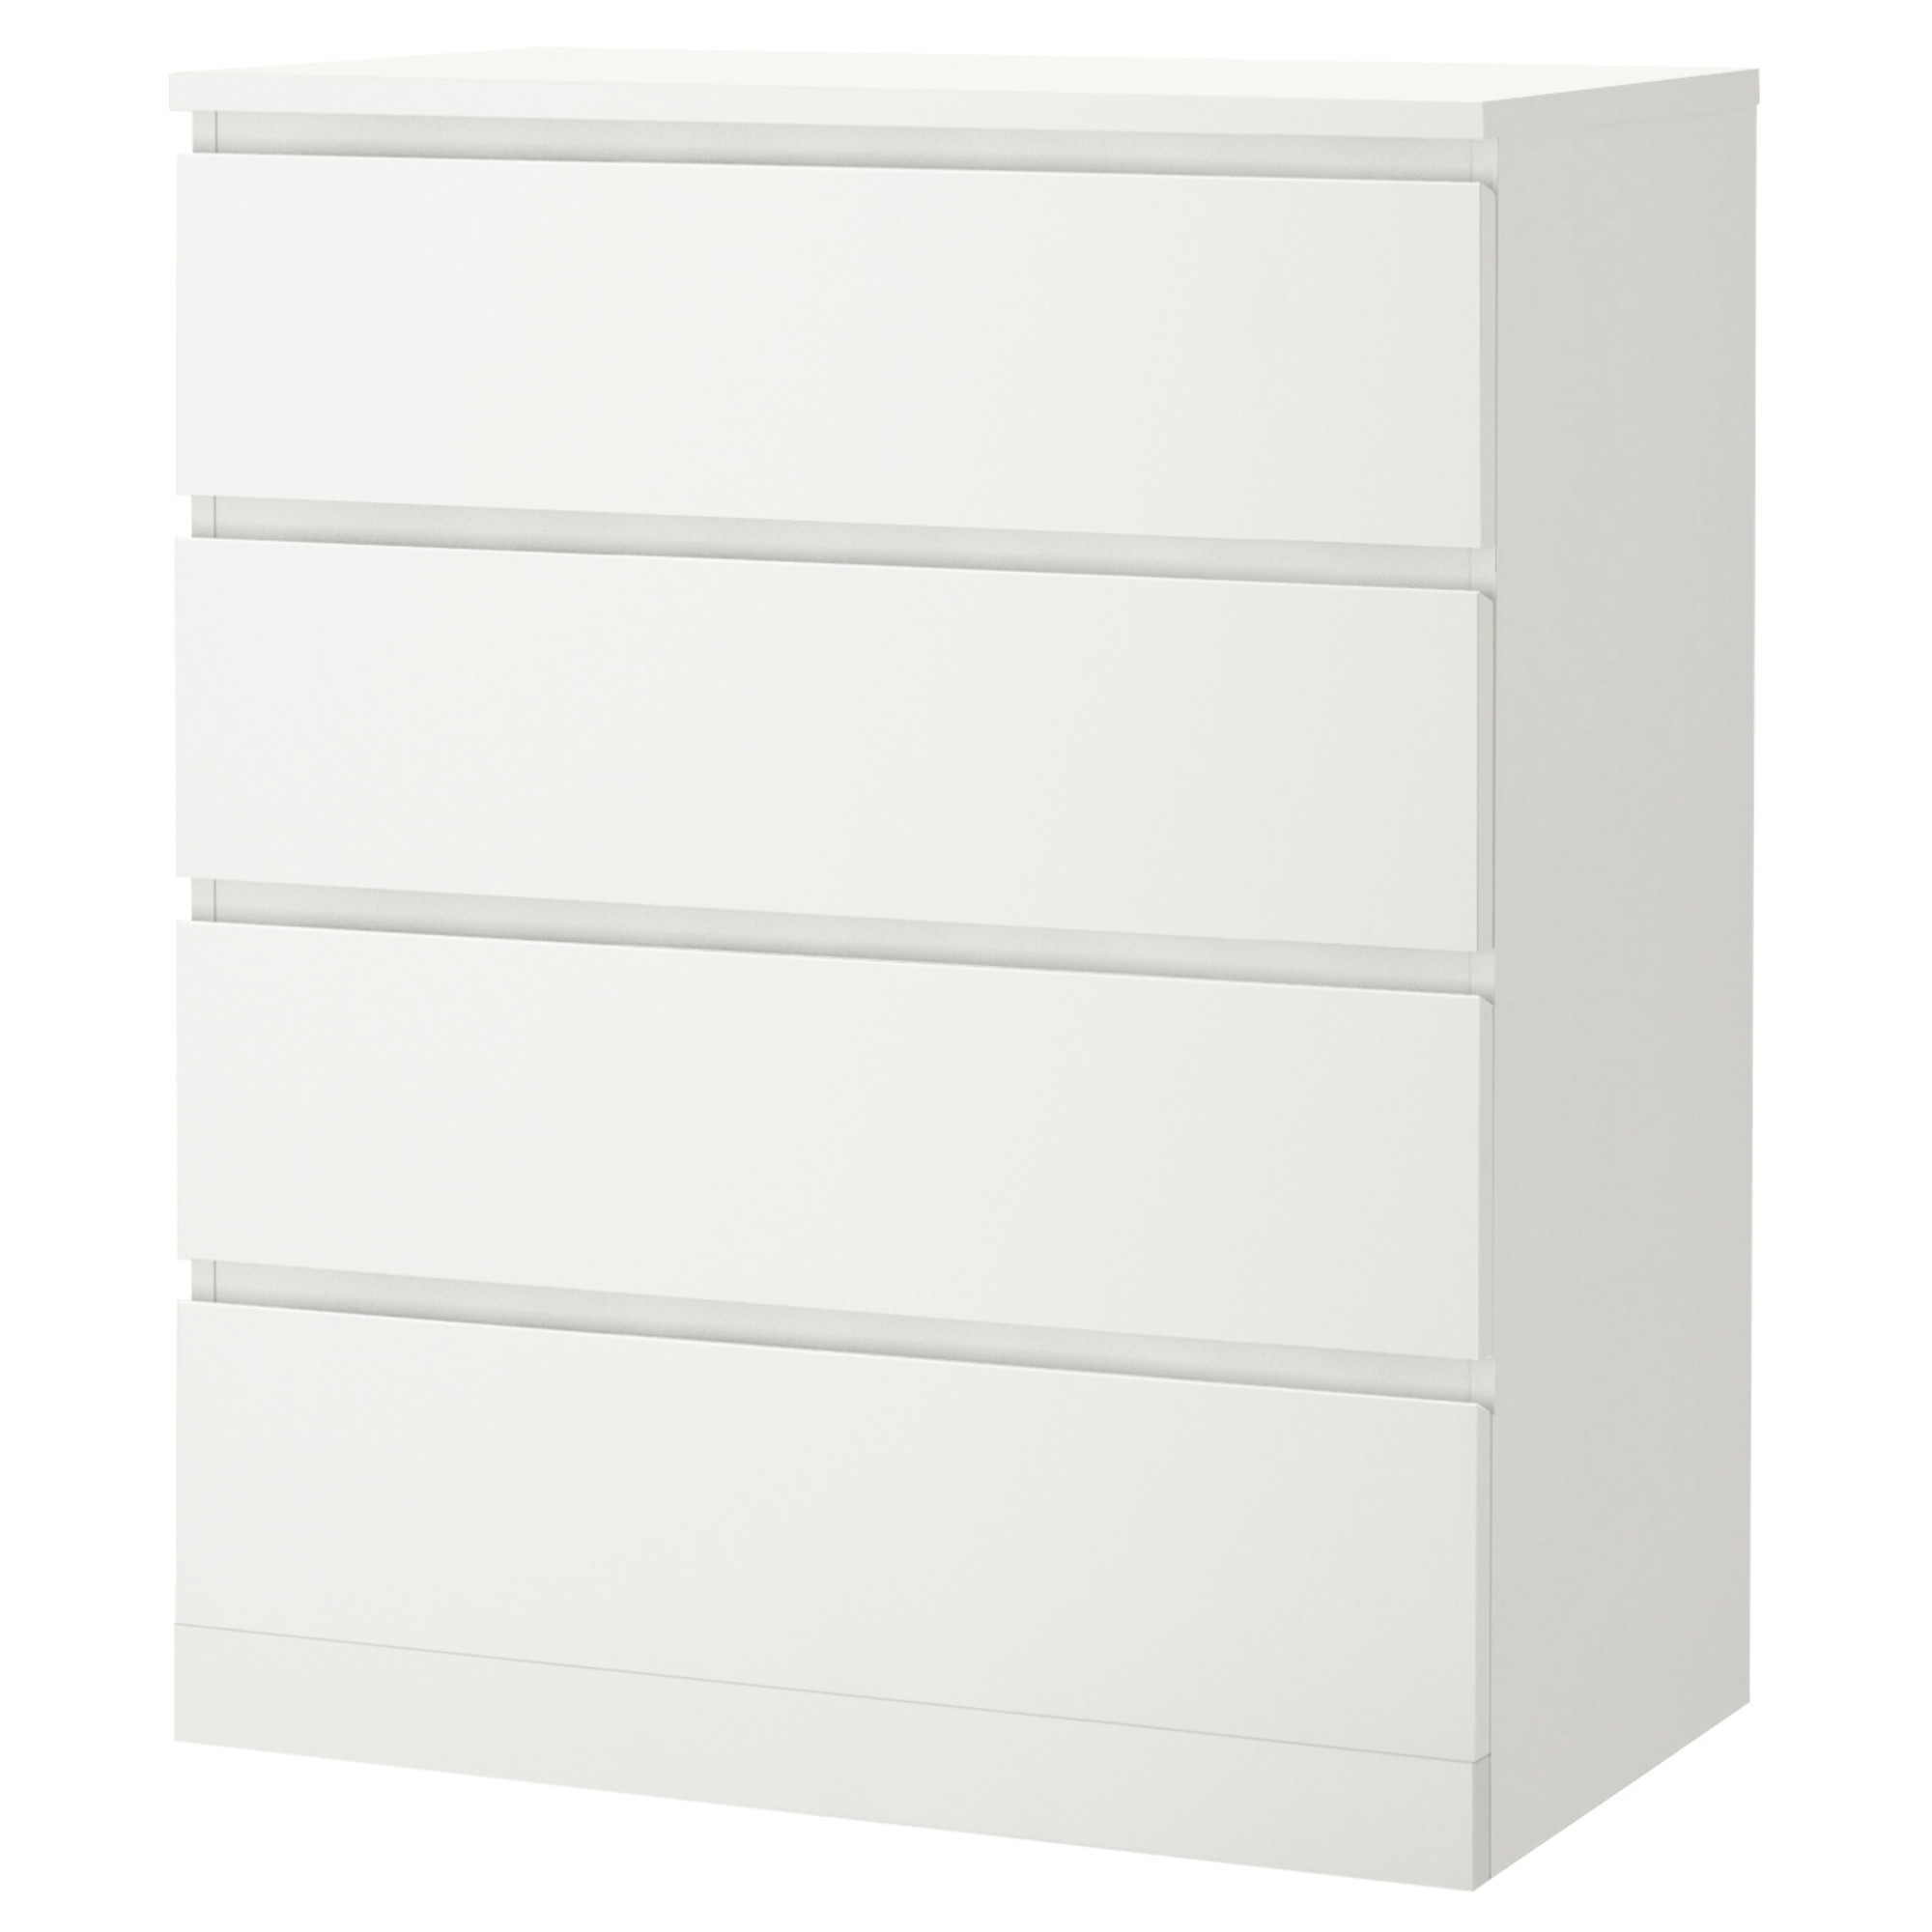 MALM chest of 4 drawers